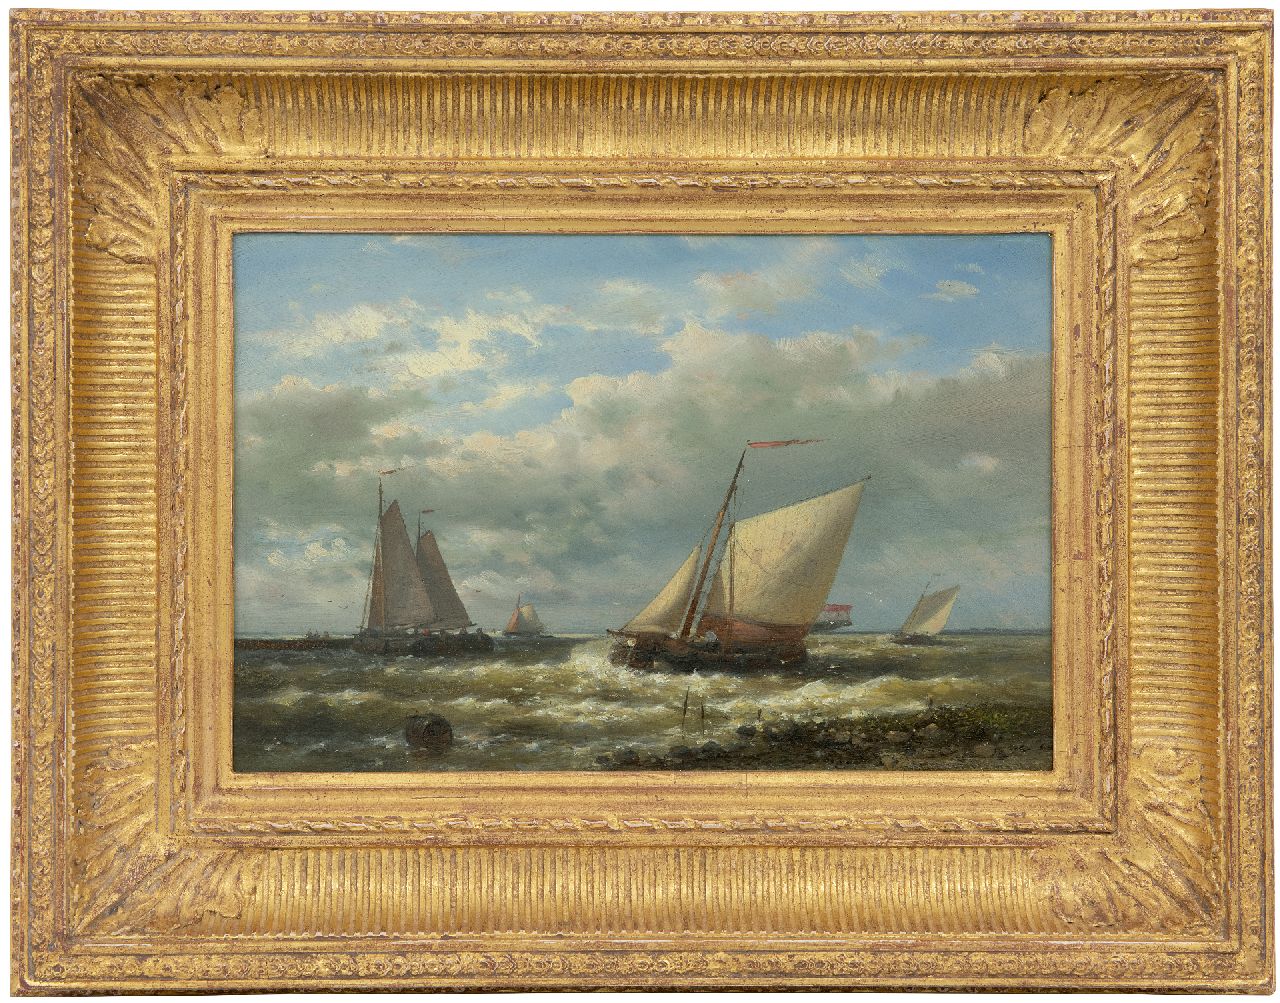 Hulk A.  | Abraham Hulk | Paintings offered for sale | Sailing vessels on the Zuiderzee, oil on panel 20.2 x 30.7 cm, signed on the reverse